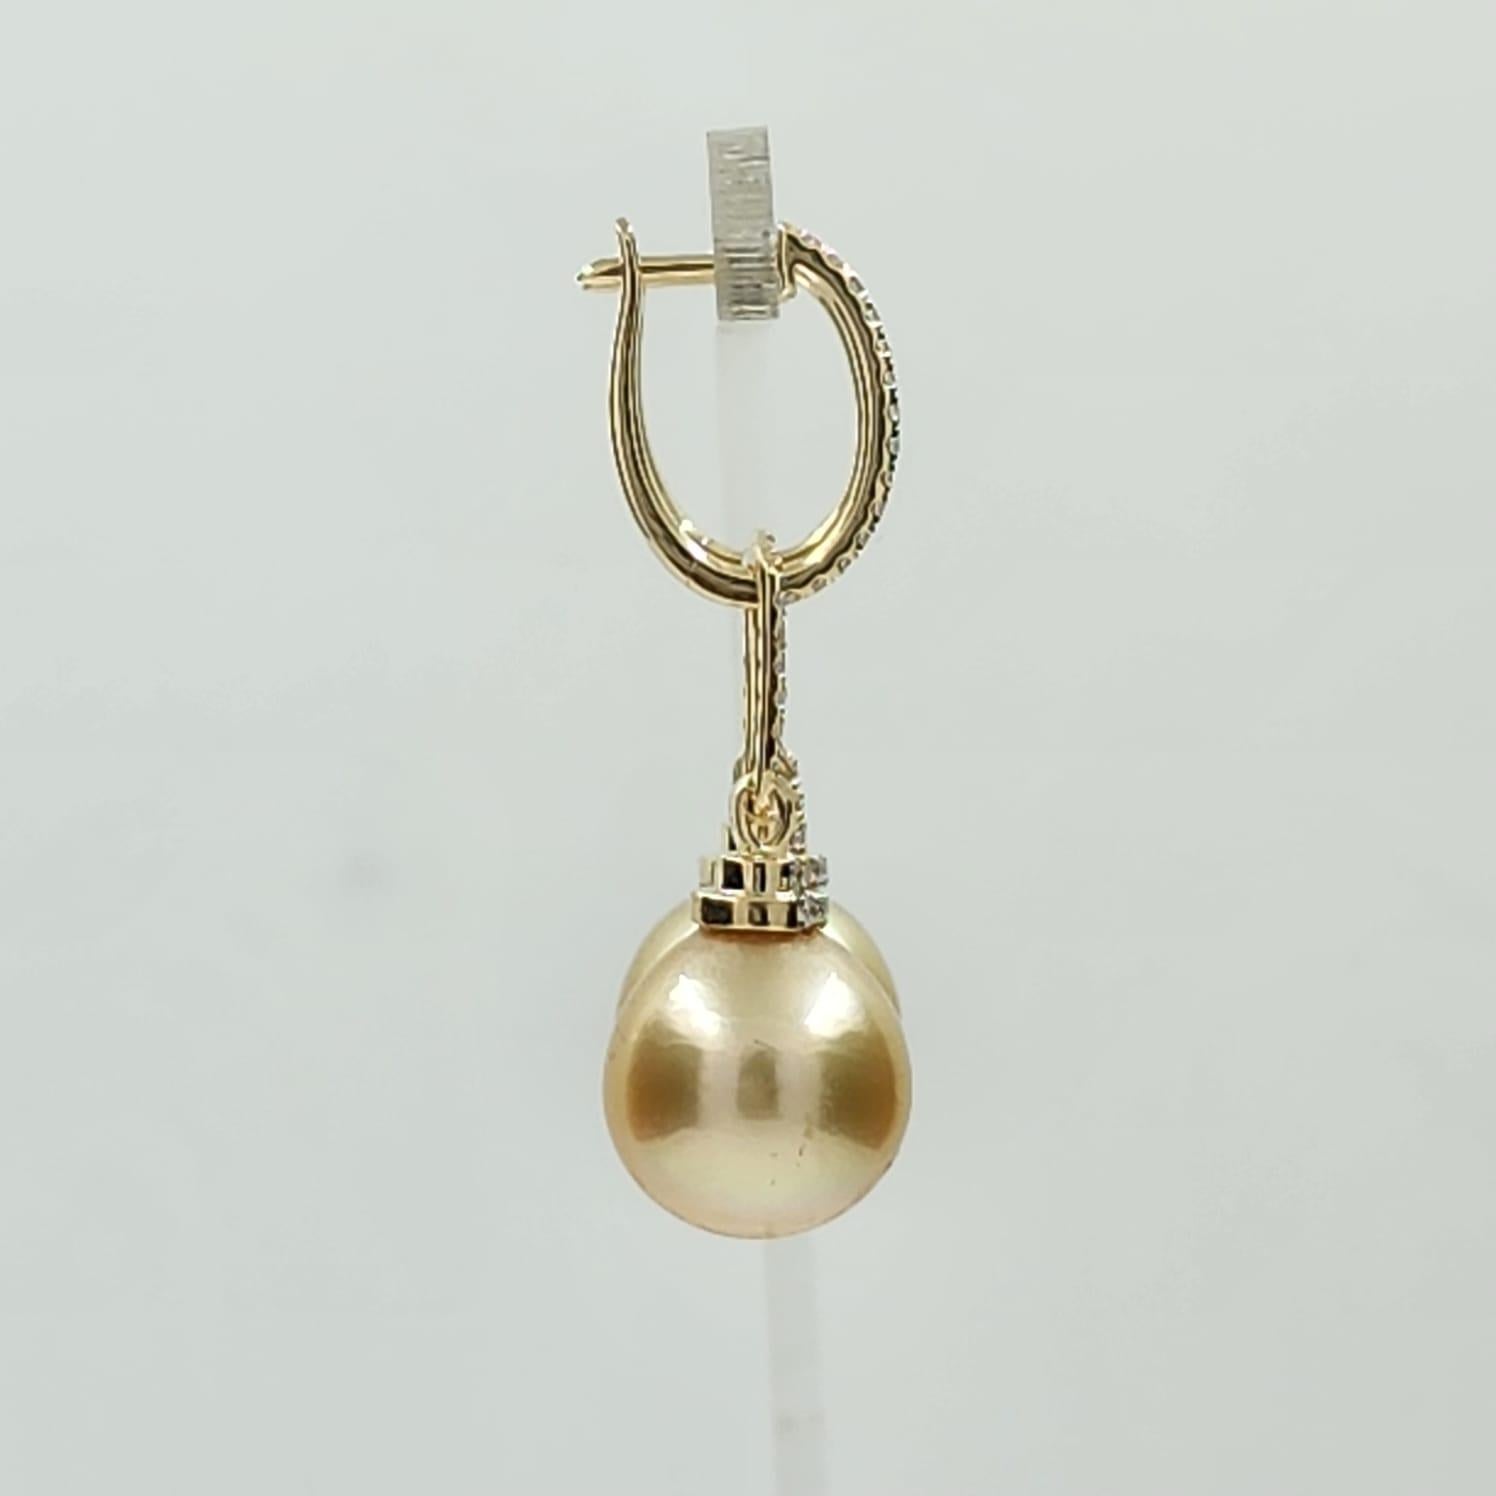 12.5 x 15mm Oval South Sea Pearl Diamond Dangle Earrings in 14 Karat Yellow Gold In New Condition For Sale In Hong Kong, HK